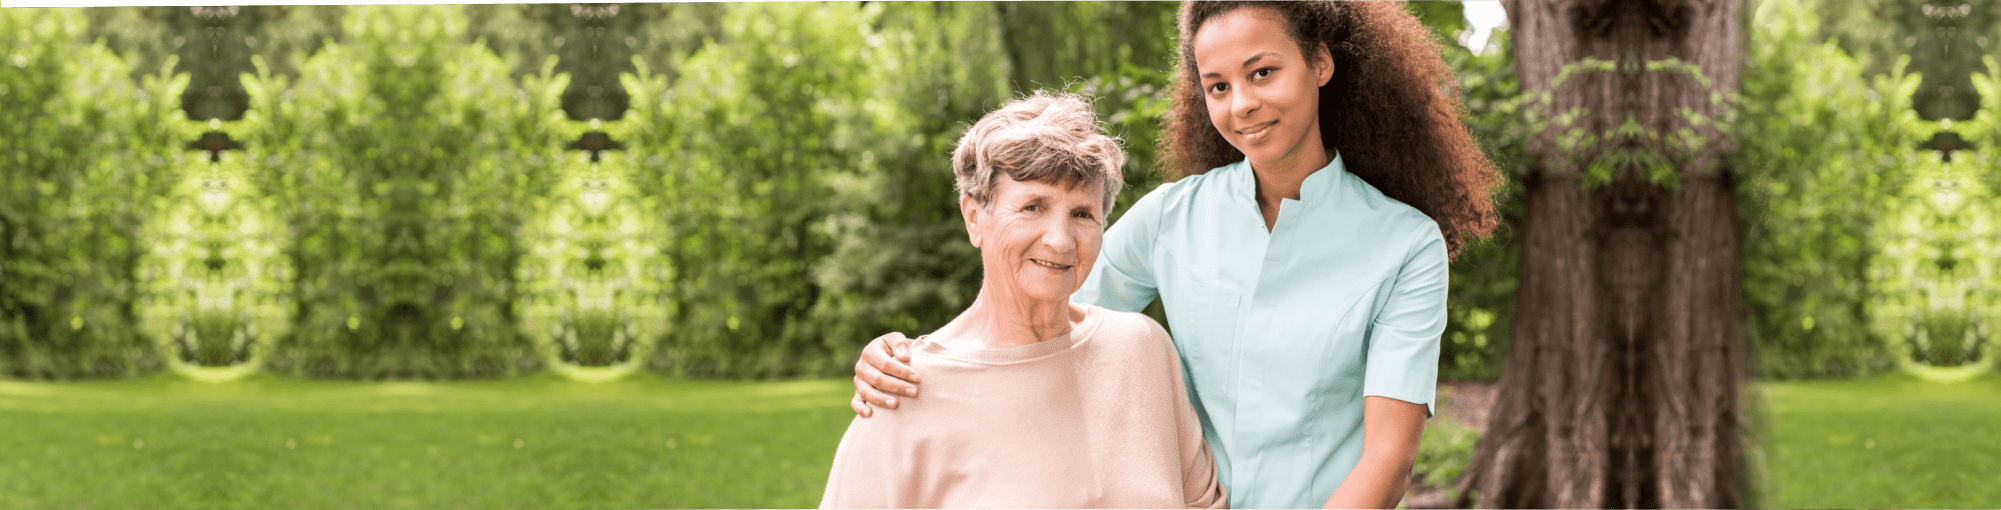 elderly woman with her caregiver outdoors